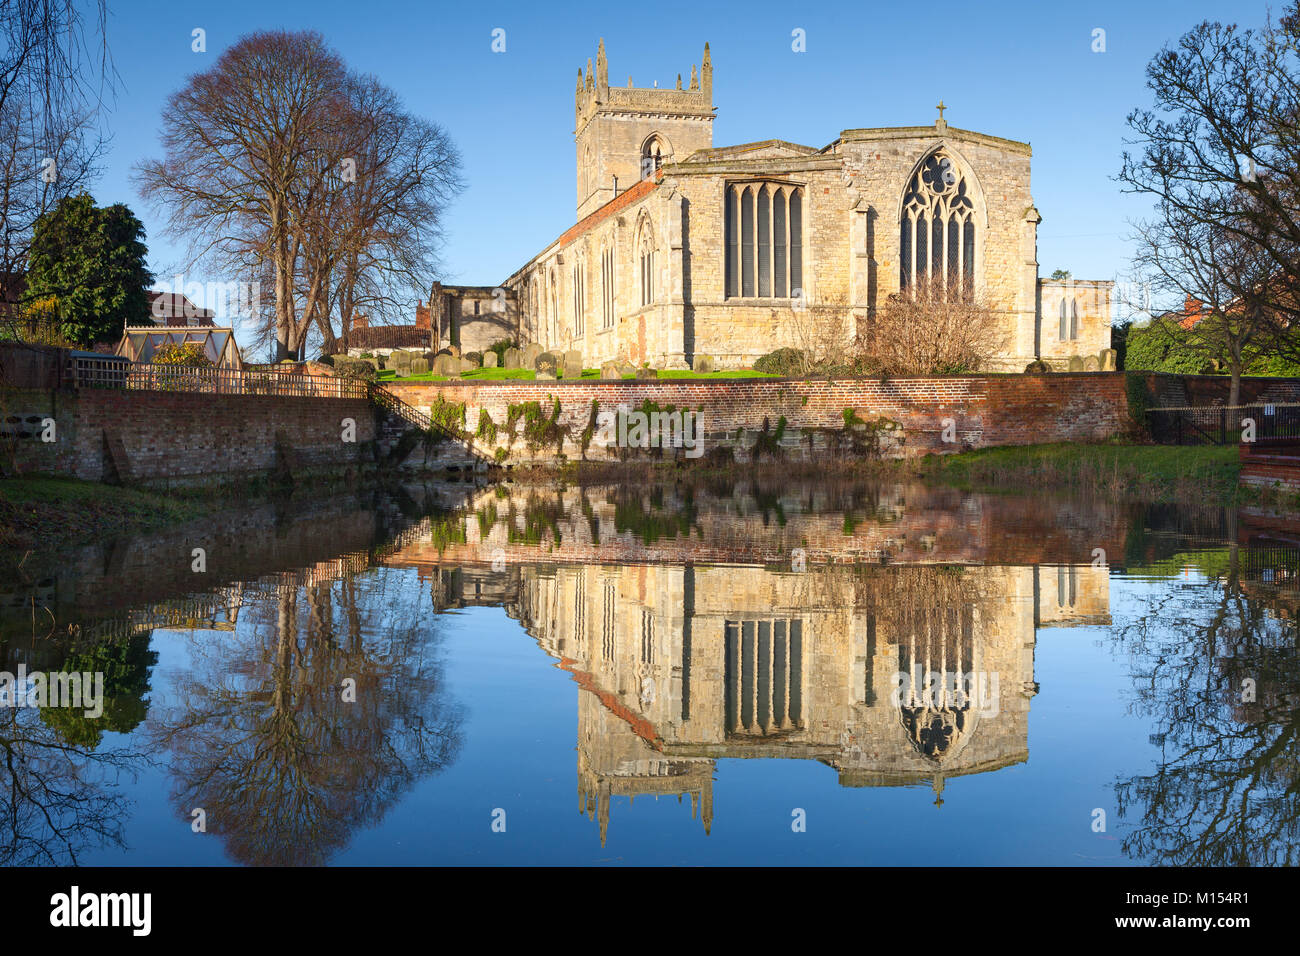 St. Mary's Church reflected in the Beck. Barton-upon-Humber, North Lincolnshire, UK. January 2018. Stock Photo